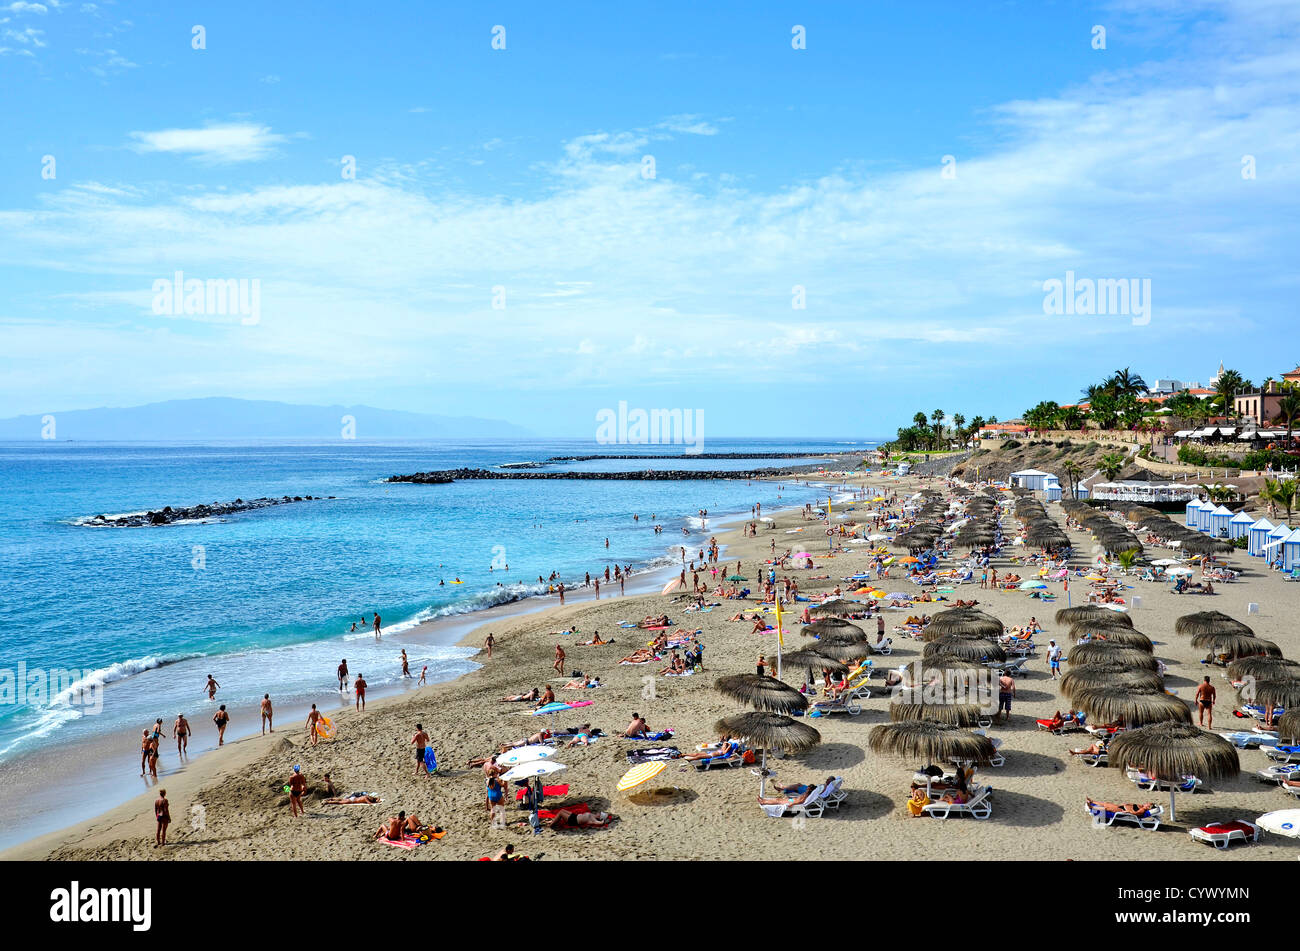 The beach in the resort of Bahia Del Duque on the Costa Adeje, Tenerife, Canary Islands Stock Photo